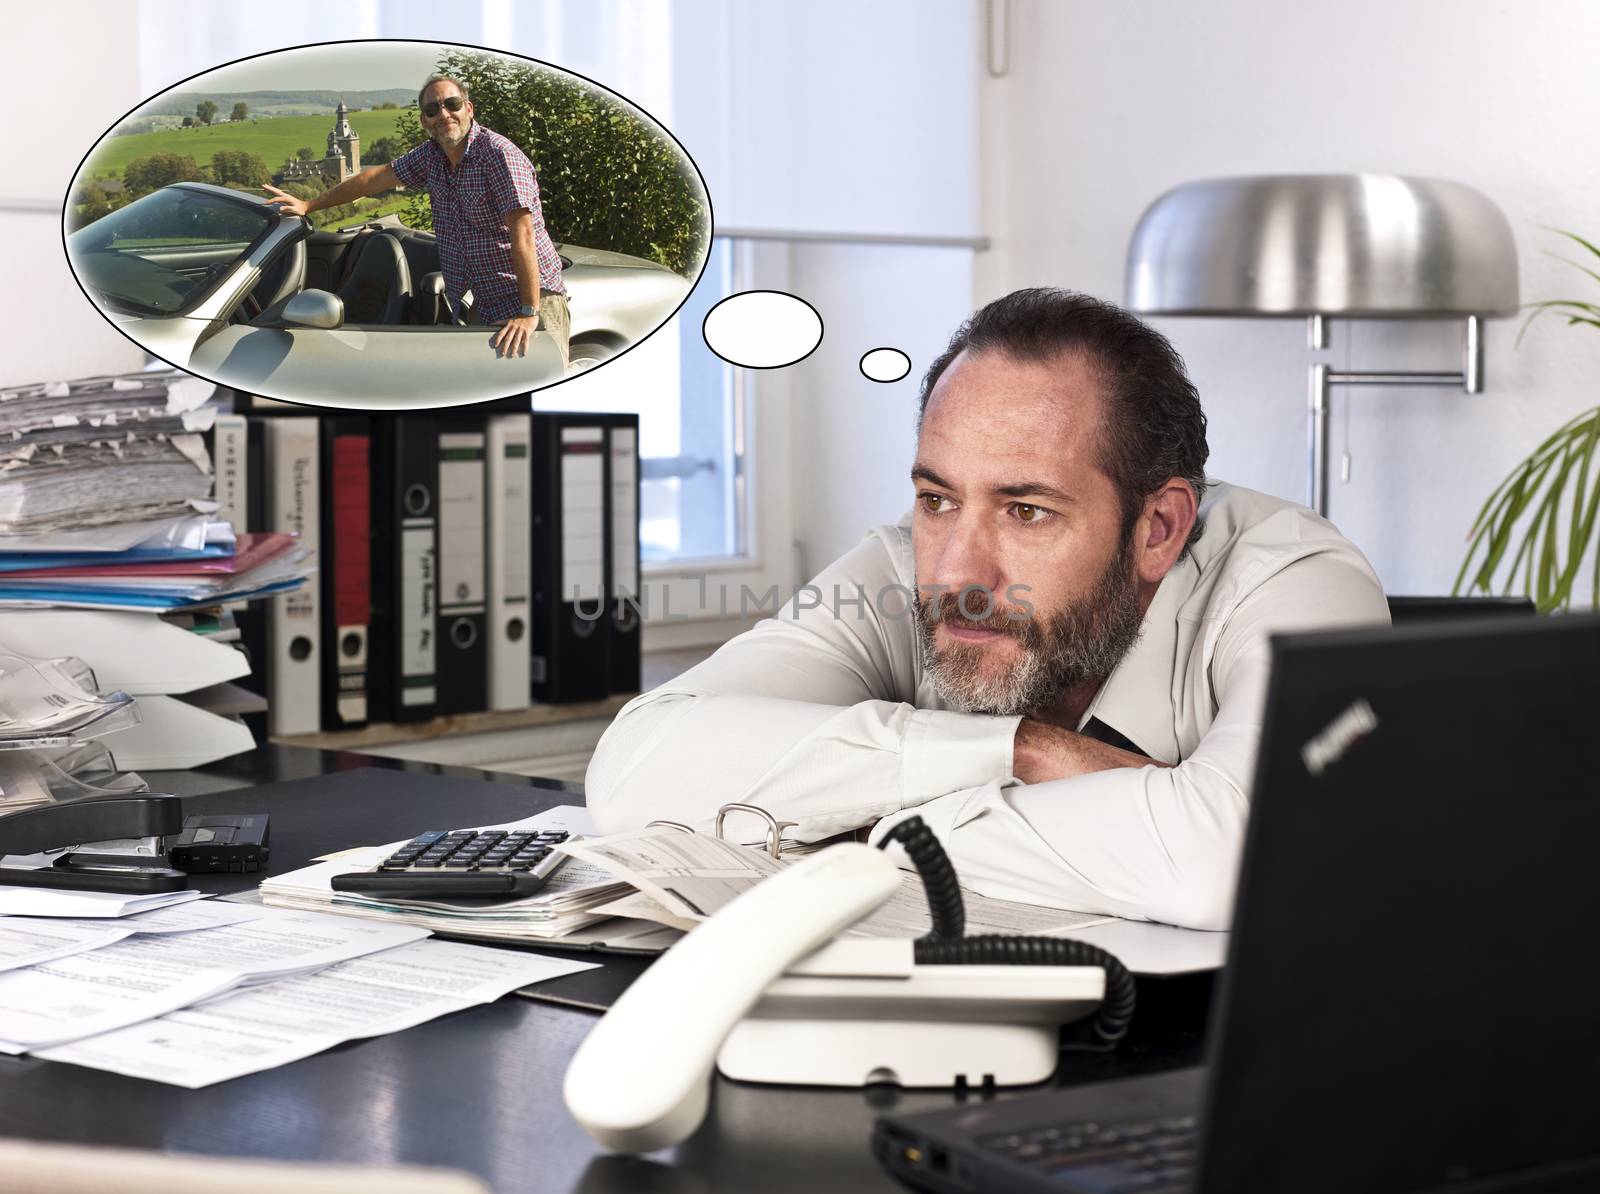 Mature businessman at desk with a thought bubble of himself and new car countryside. Horizontal shot